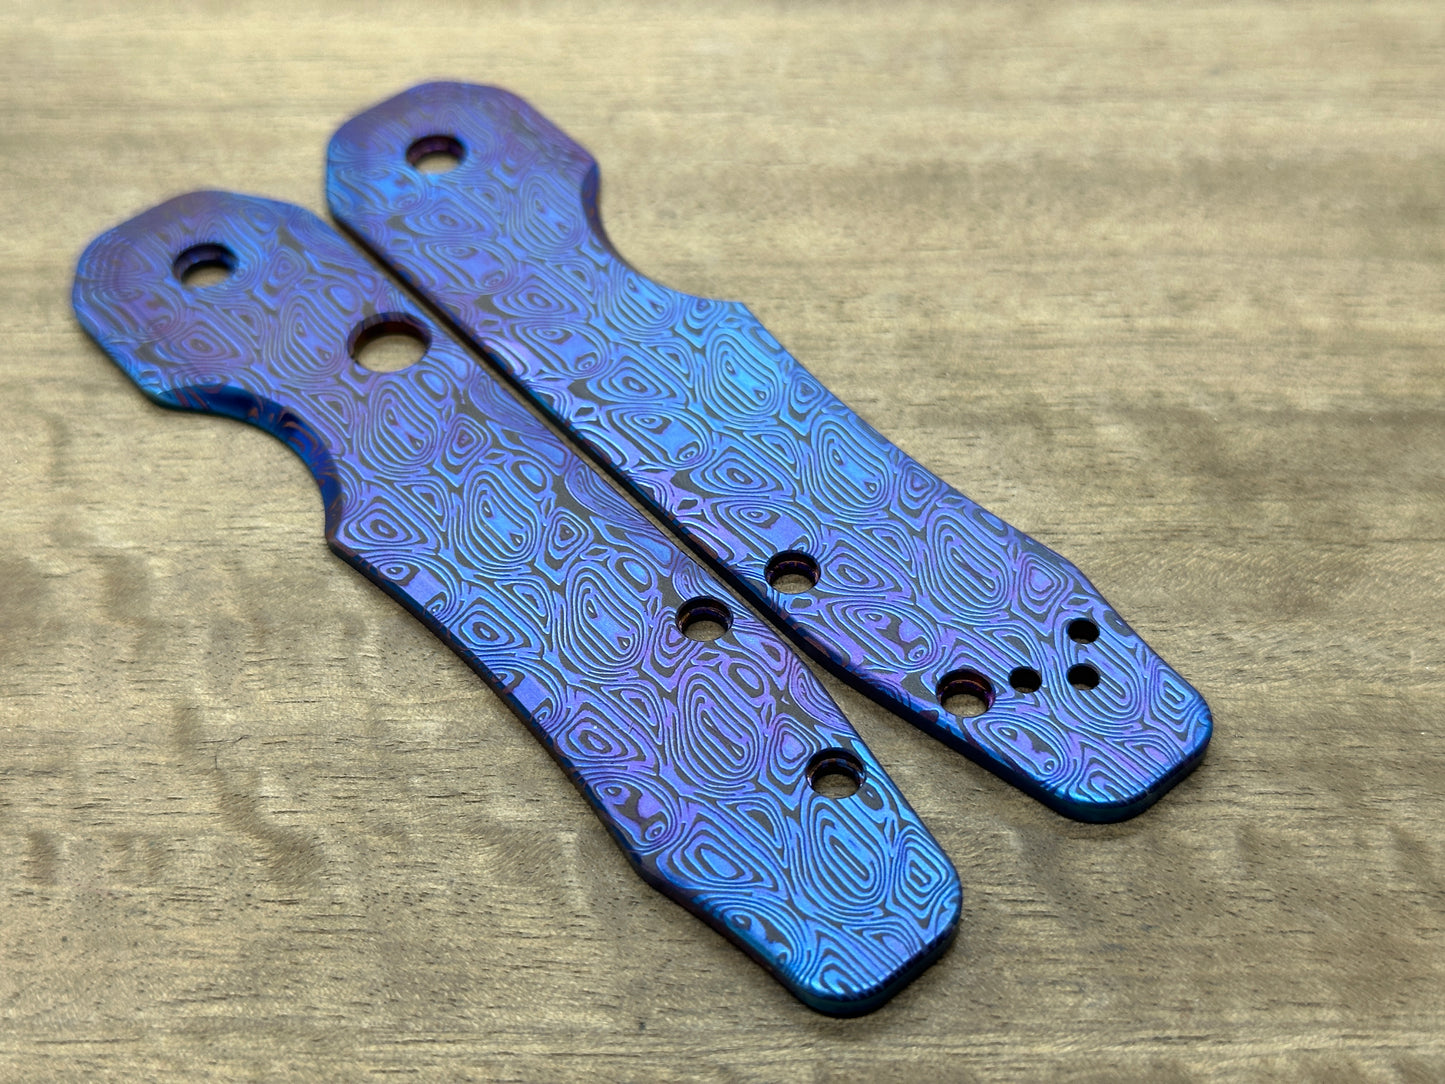 Dama AEGR Flamed Titanium Scales for Spyderco SMOCK